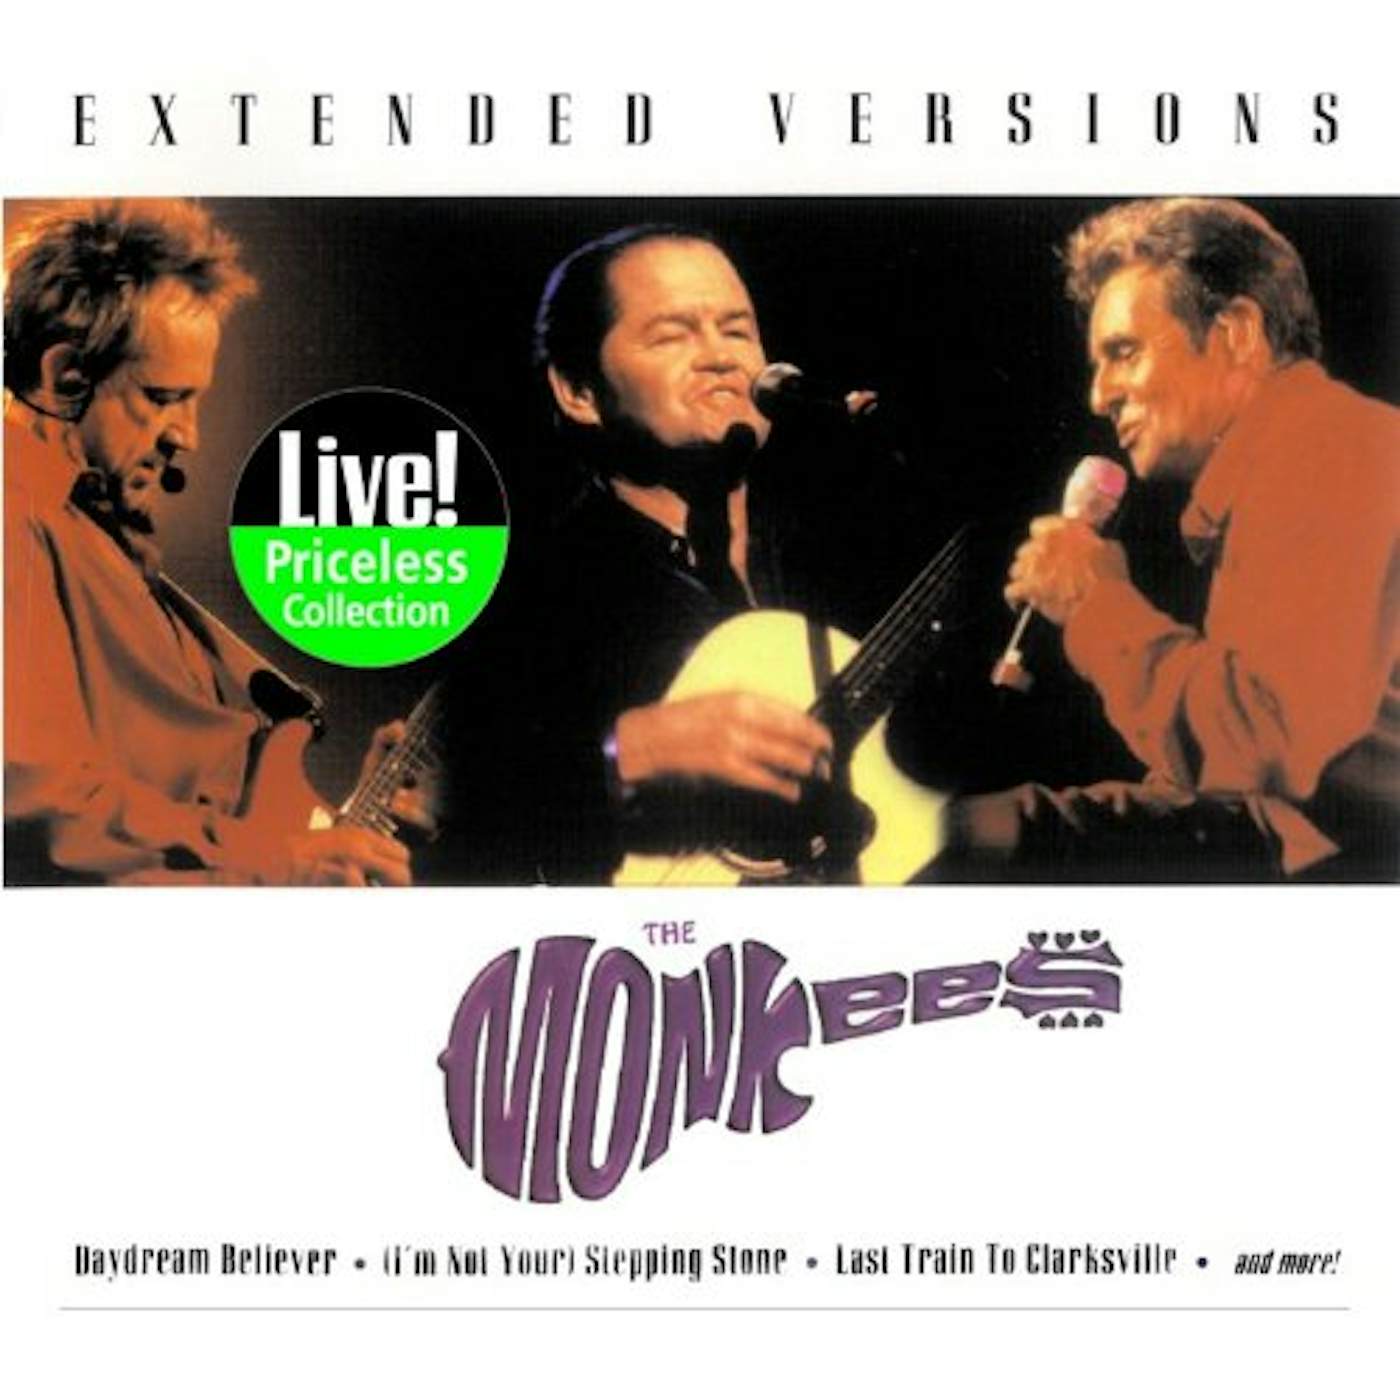 The Monkees EXTENDED VERSIONS CD